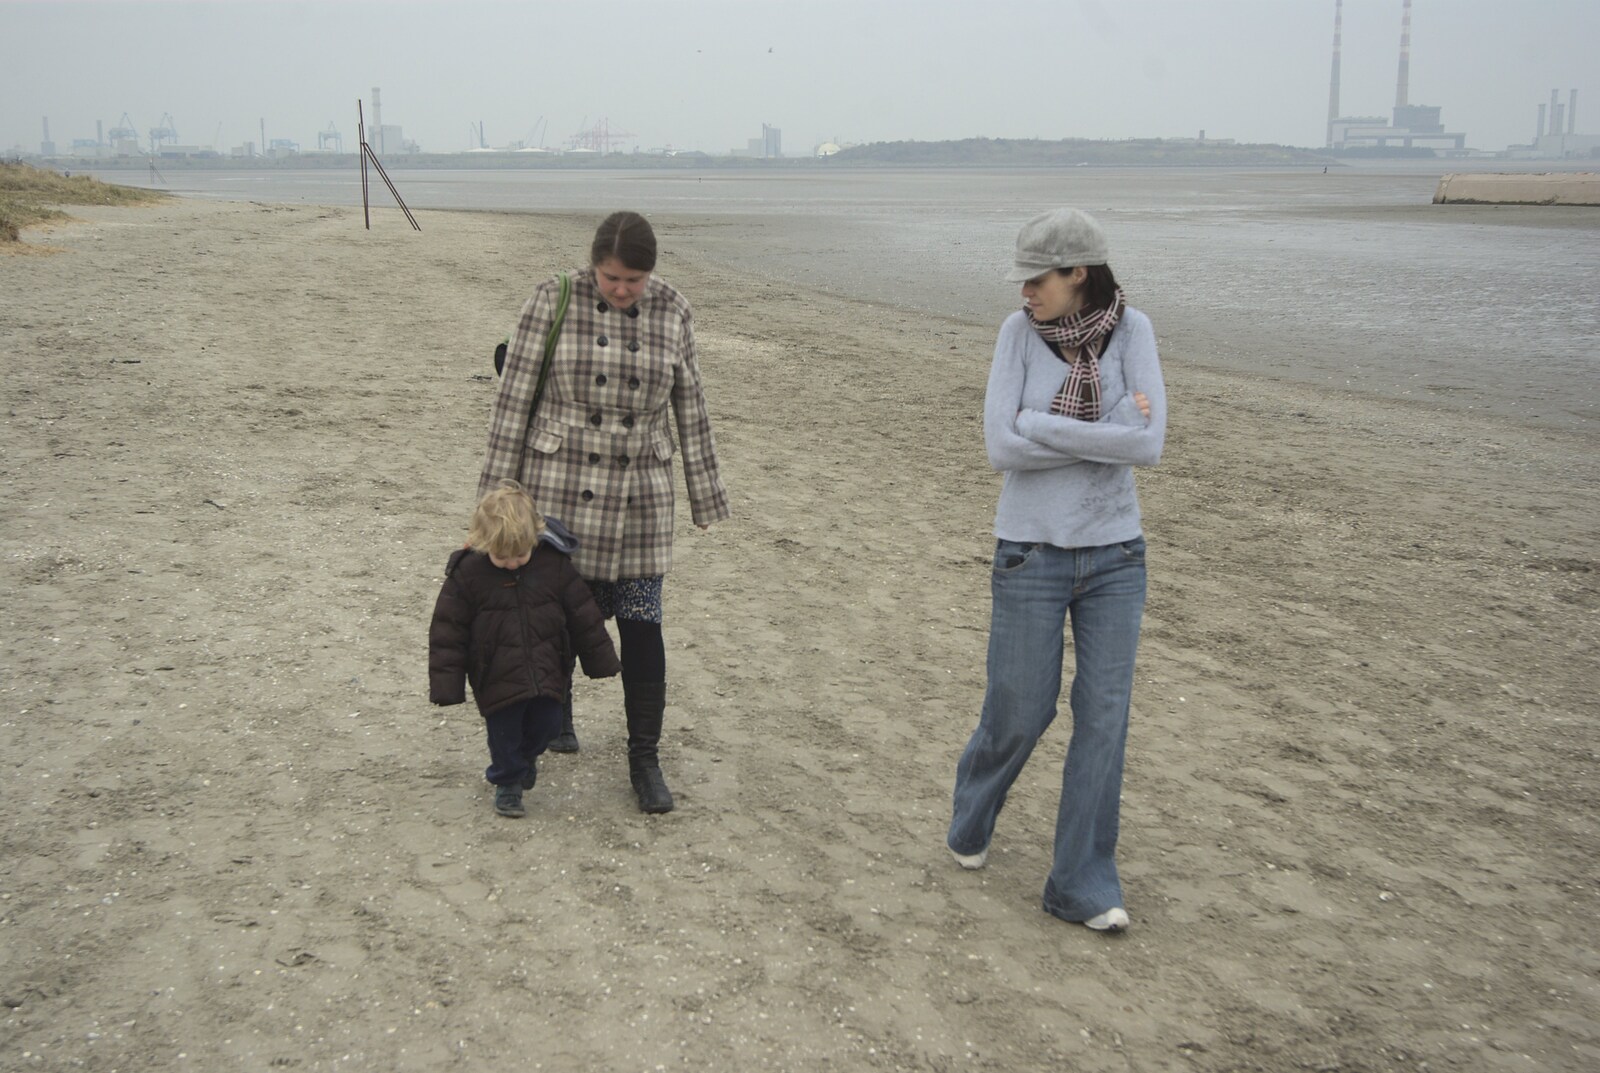 Fred, Isobel and Jen stride along the Sandymount beach from A Week in Monkstown, County Dublin, Ireland - 1st March 2011